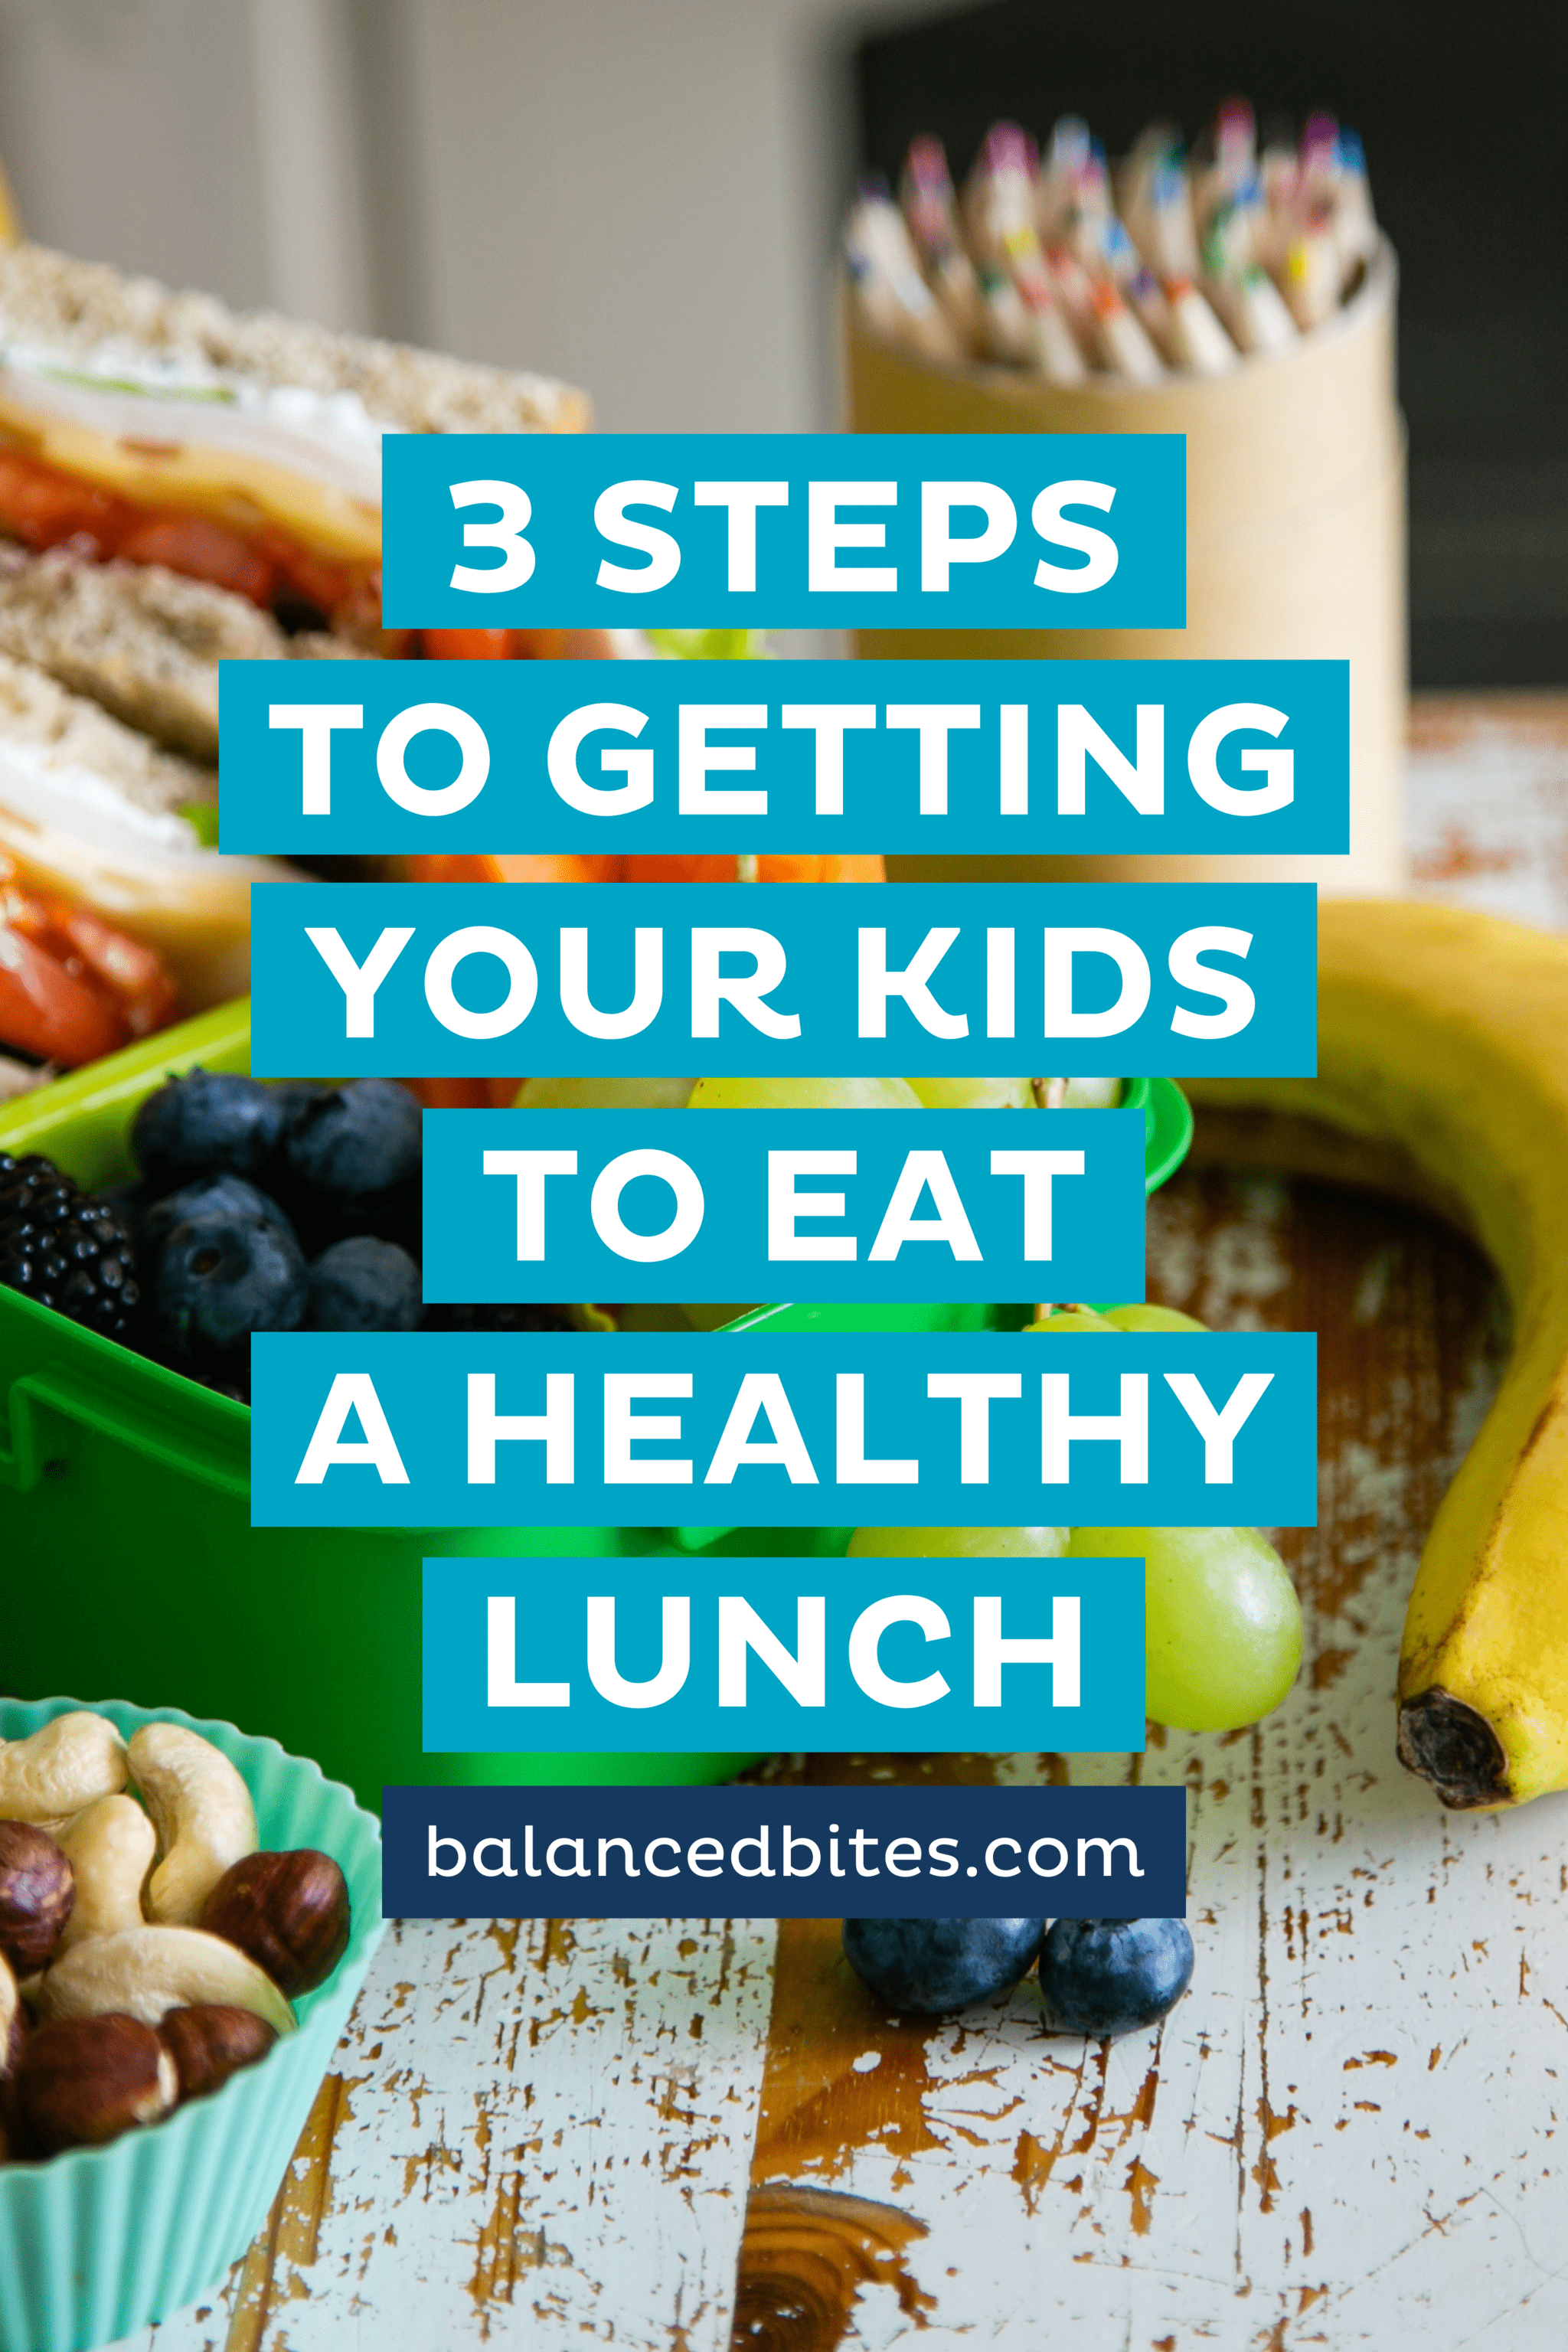 5 Steps To Getting Your Kids To Eat A Healthy Lunch | Balanced Bites